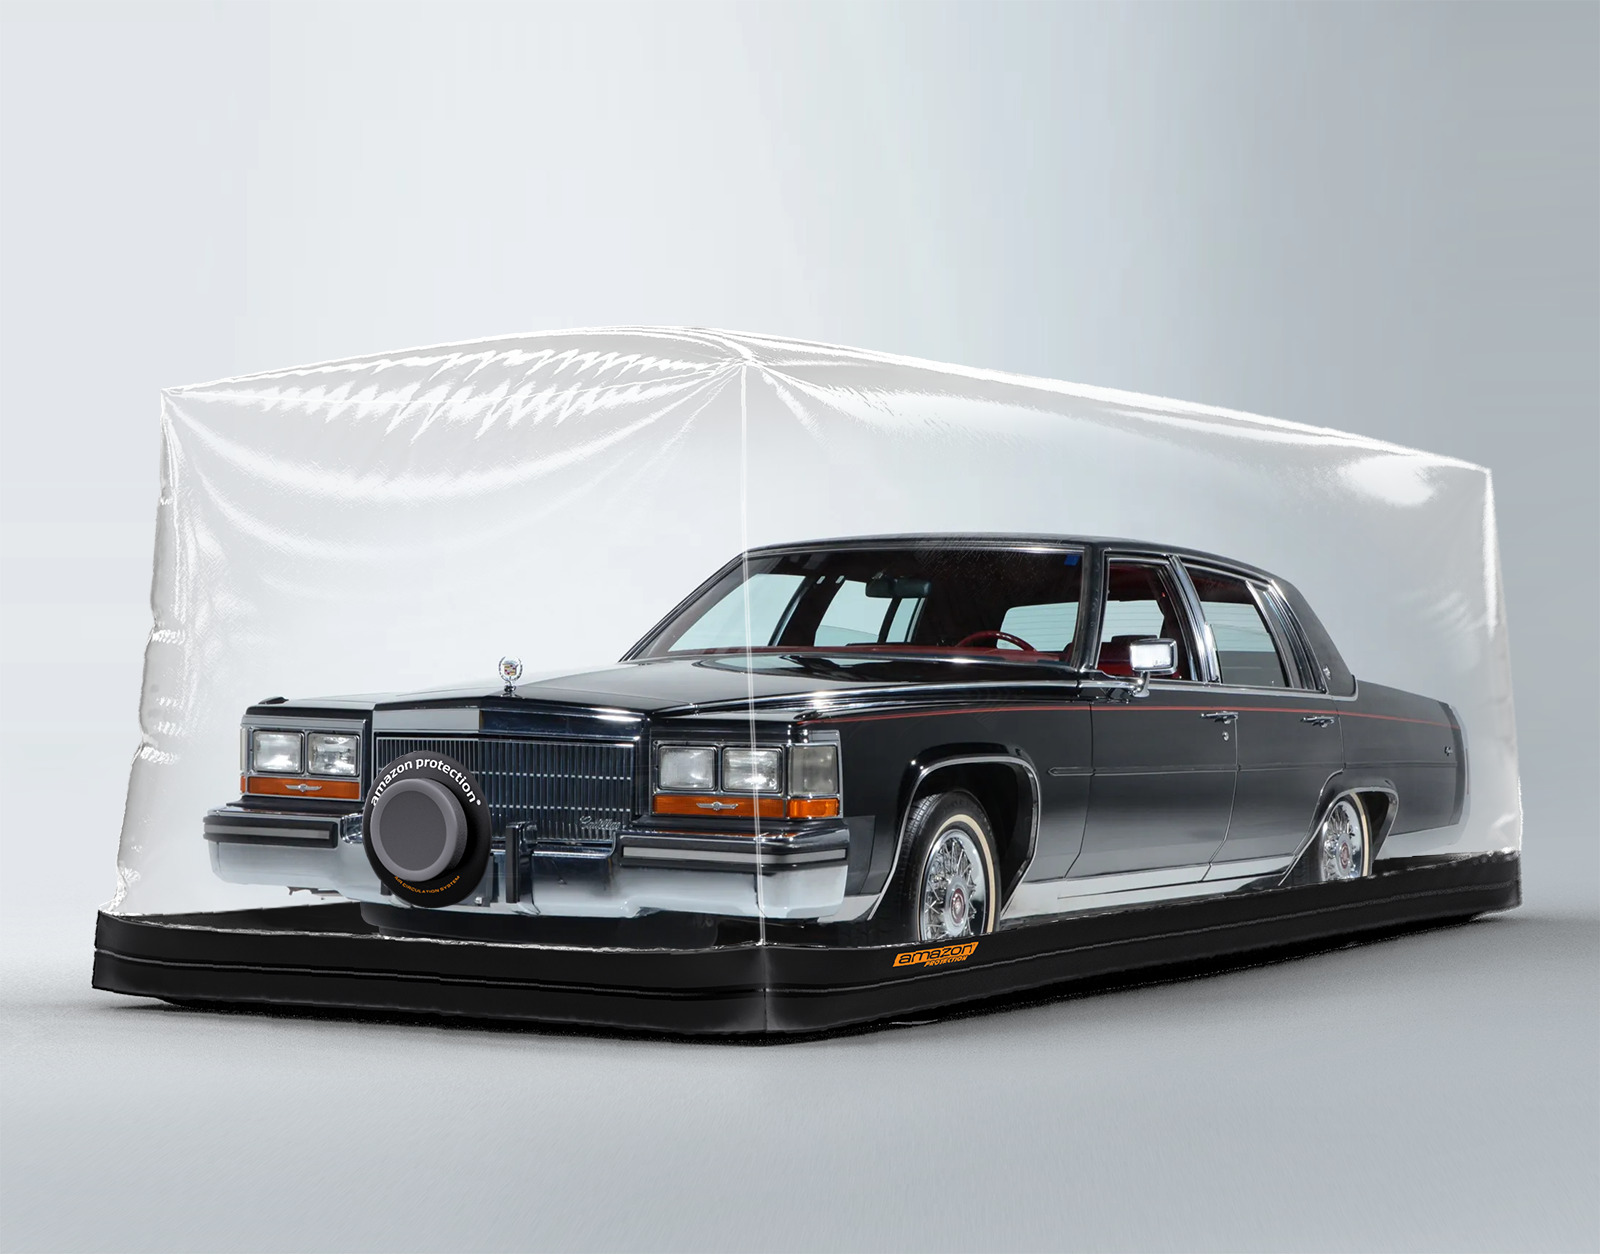 Amazon Protection Car Cover Cadillac Brougham Inflatable Capsule Garage Cover